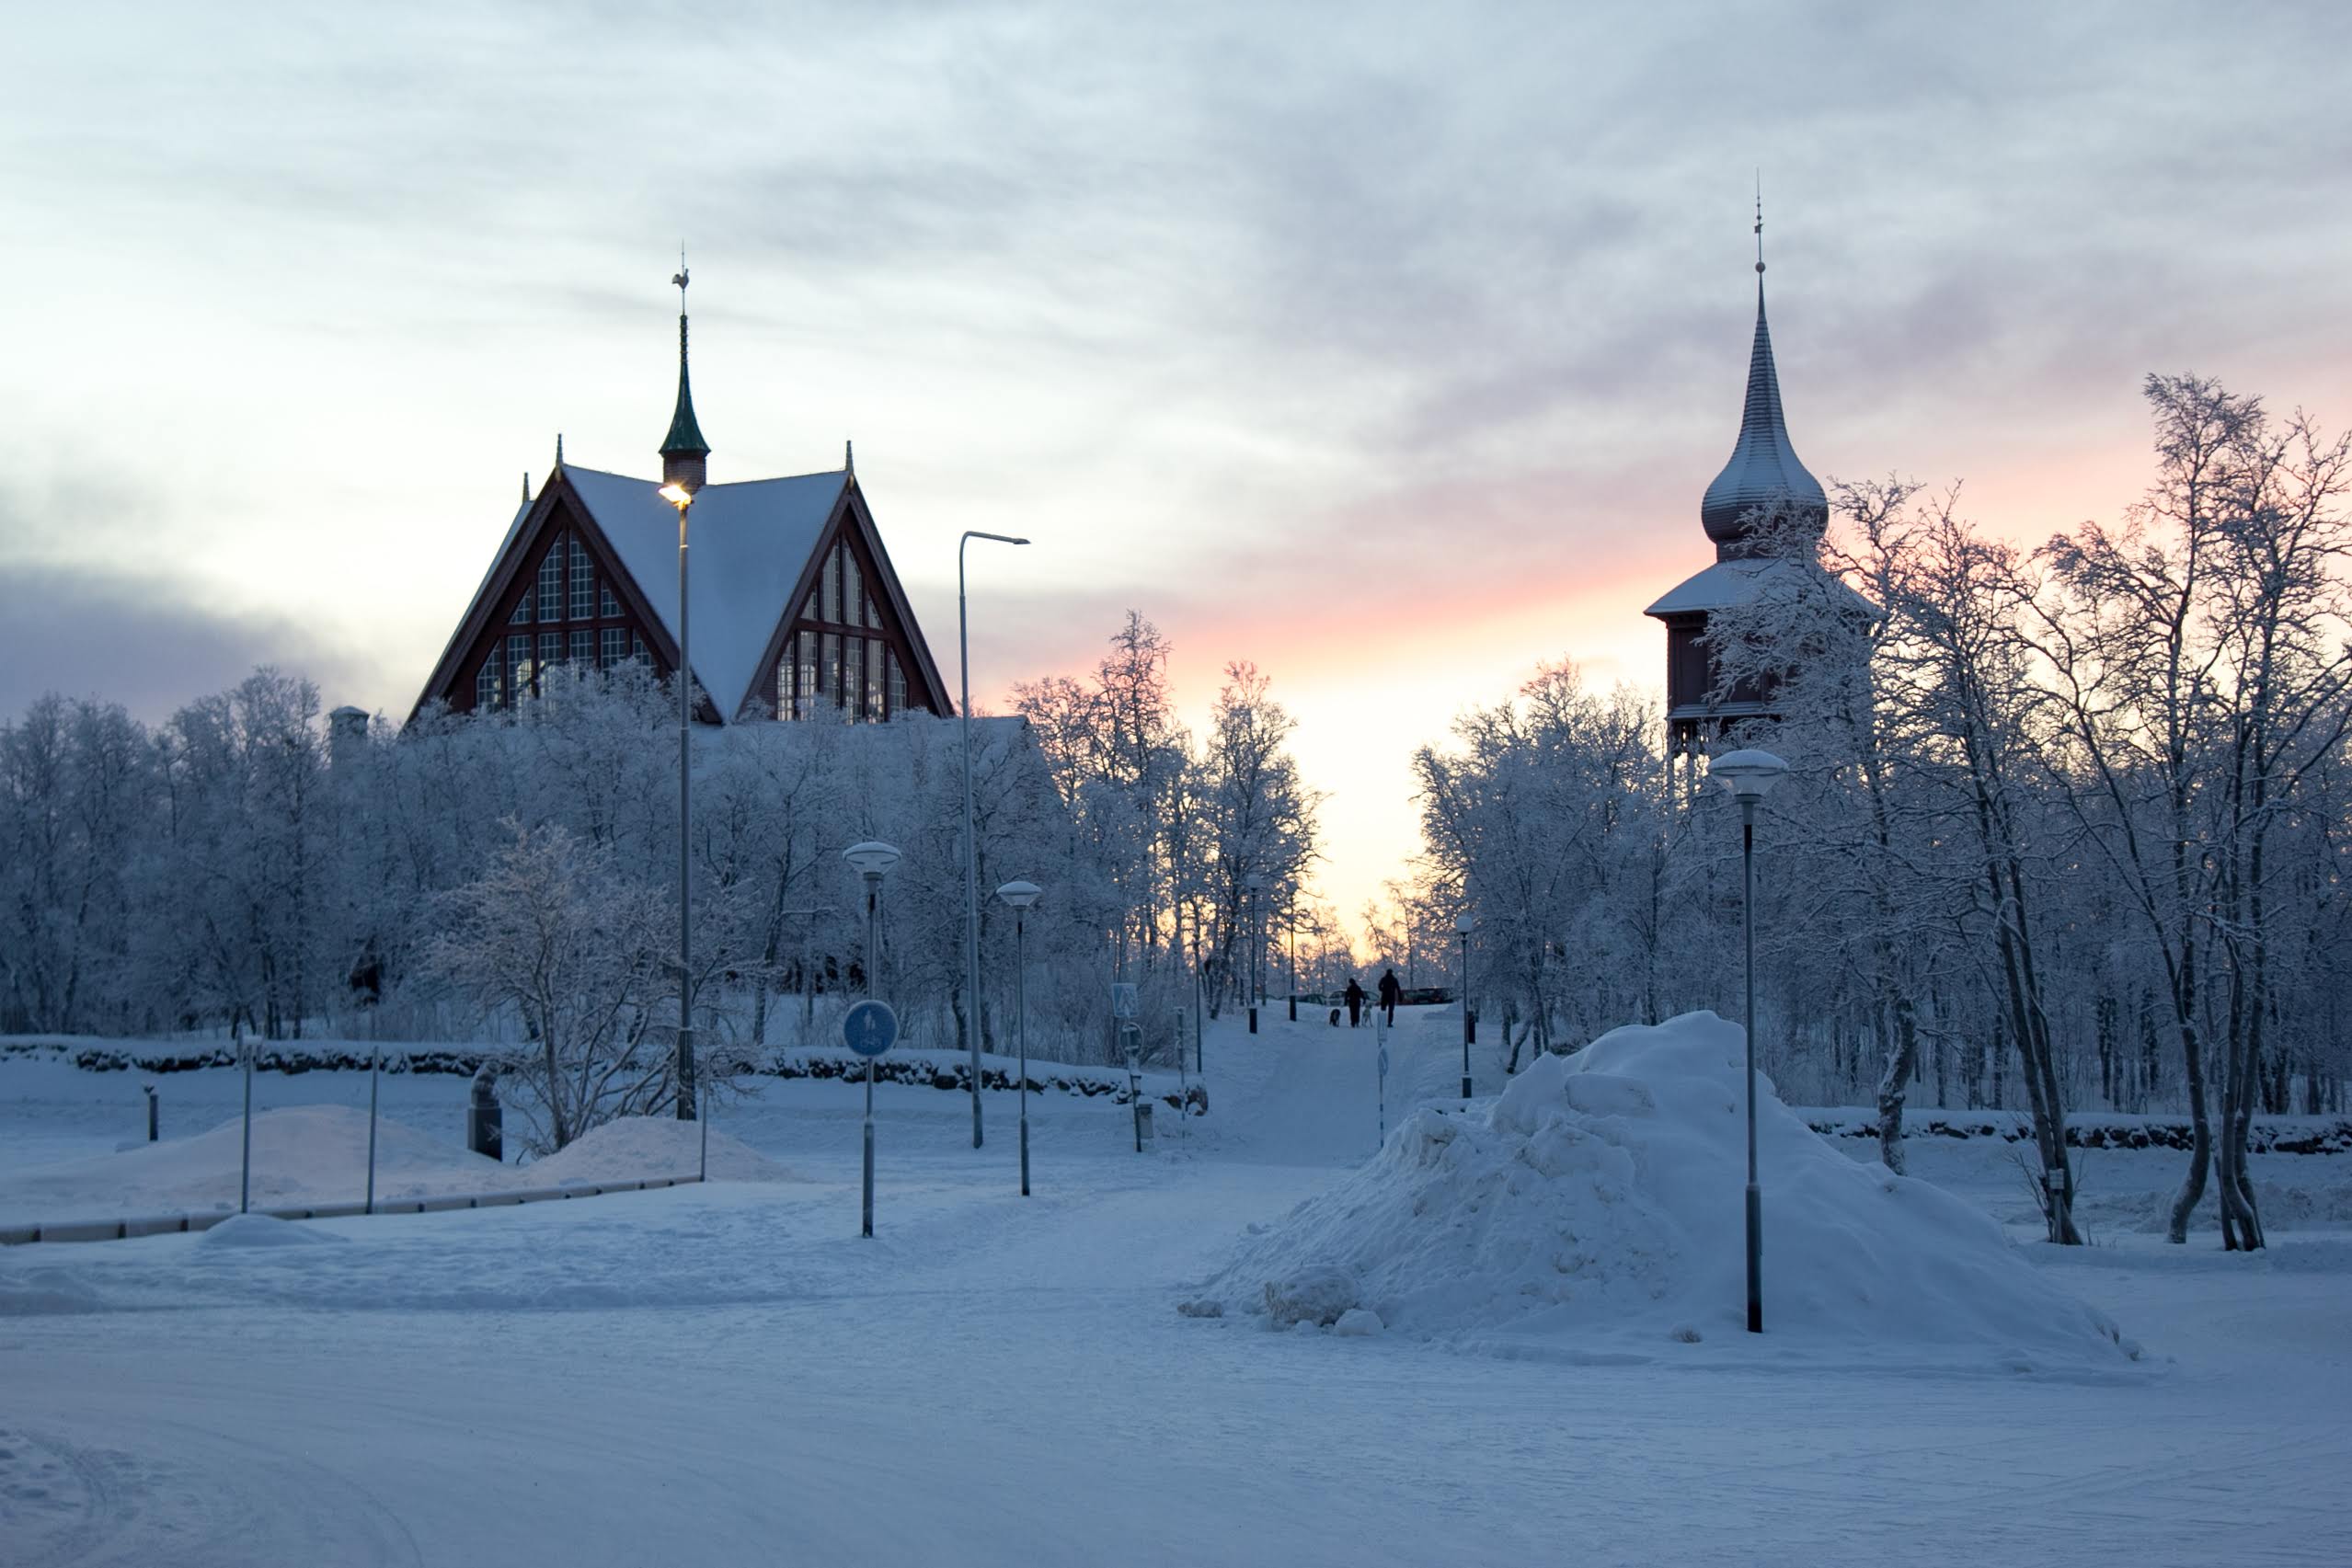 Why a trip to Kiruna should be on your bucket list - Study in Sweden